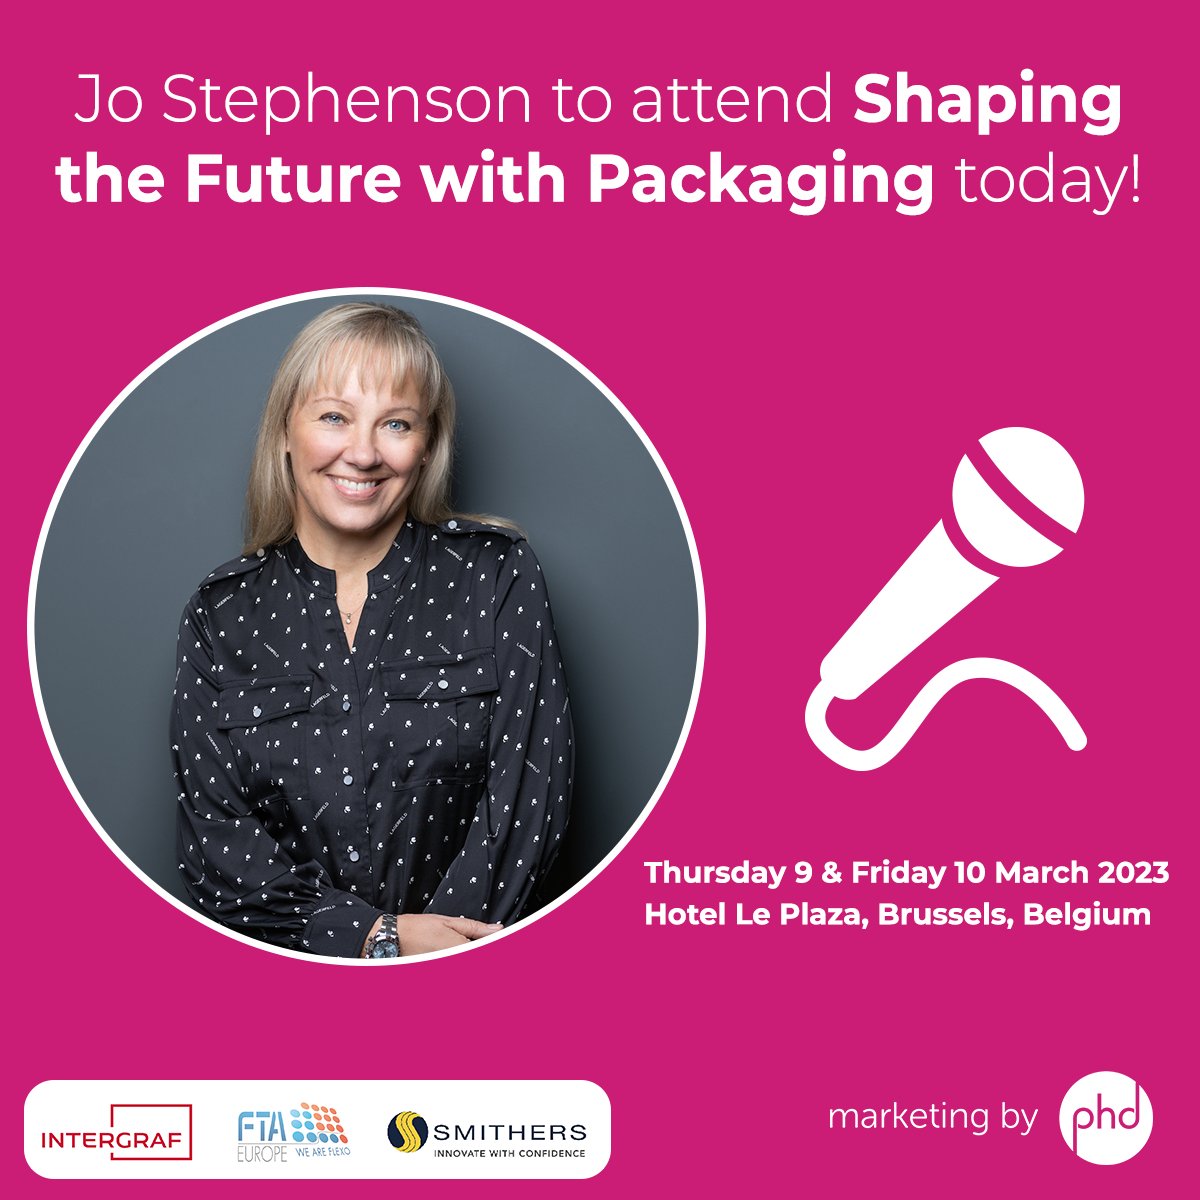 Today's the day - our Managing Director at PHD, Jo Stephenson, will moderate Shaping the Future with Packaging! 🎤

Read more about the event here: intergraf.eu/events/shaping…

#PrintingIndustry #PackagingIndustry #Event #FlexoPrinting #PHDMarketing #B2BMarketing